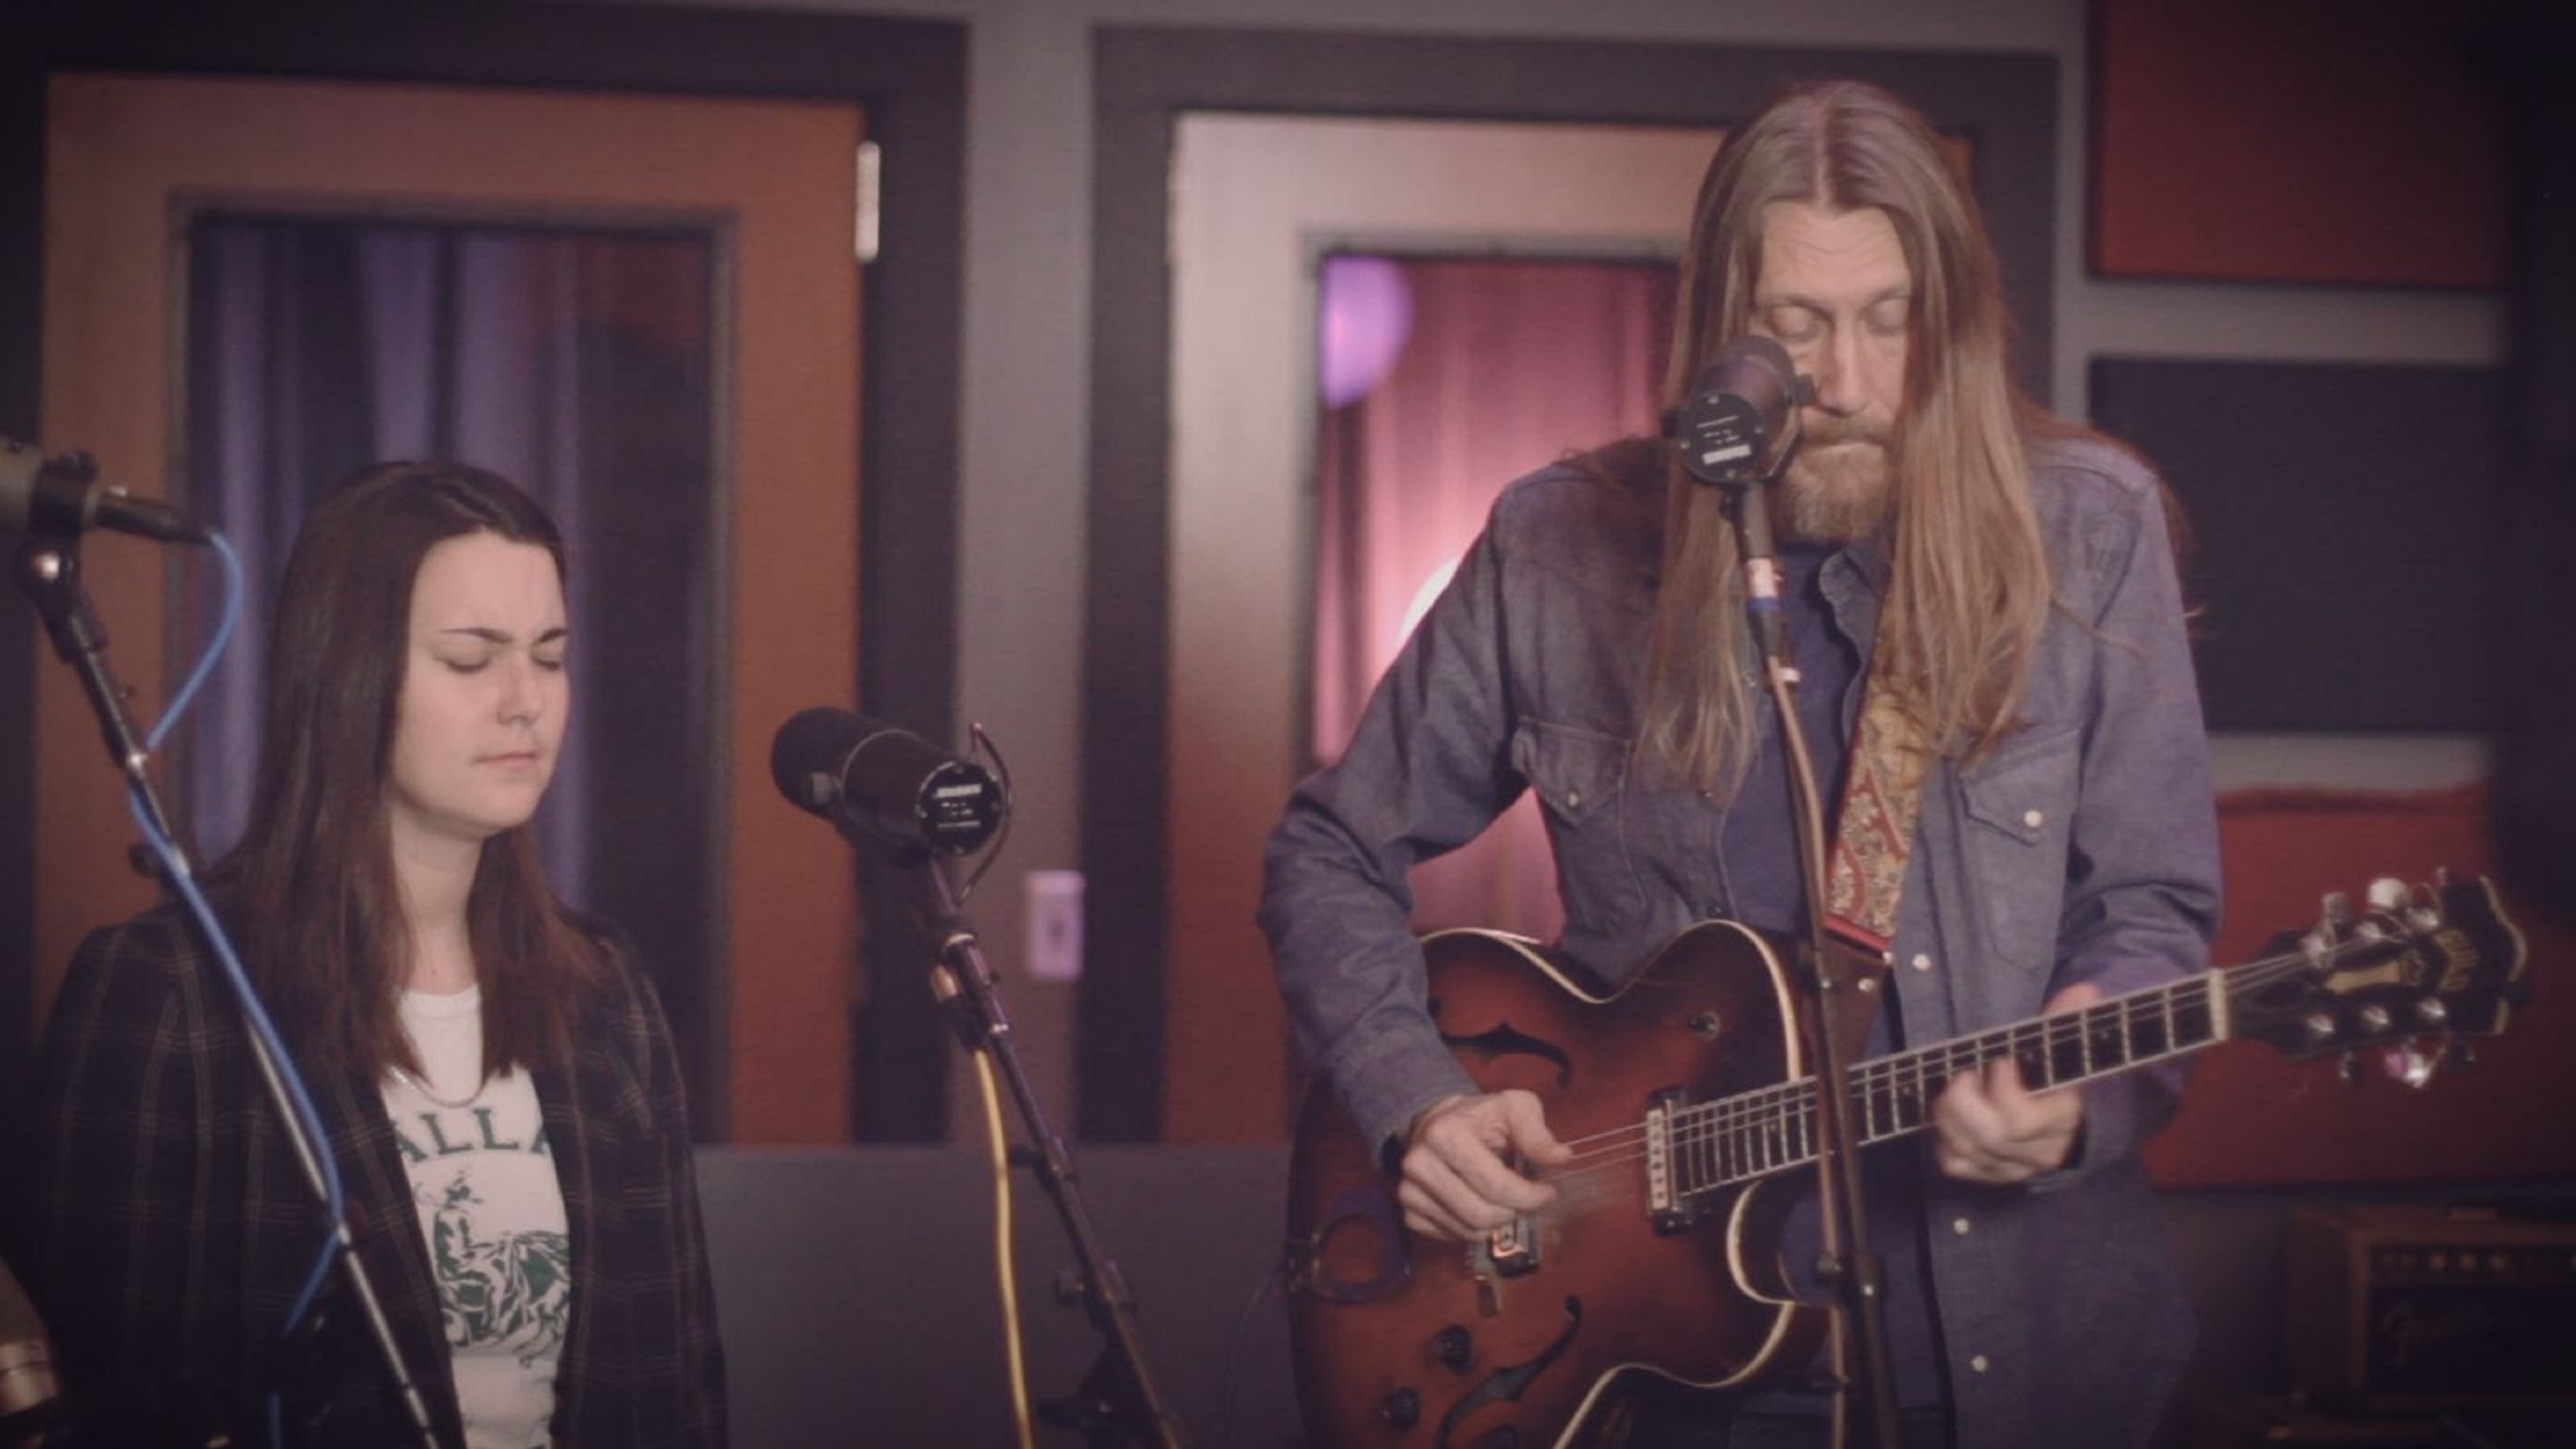 Oliver Wood & Katie Pruitt Share Video Performance Of "Have You No Shame"